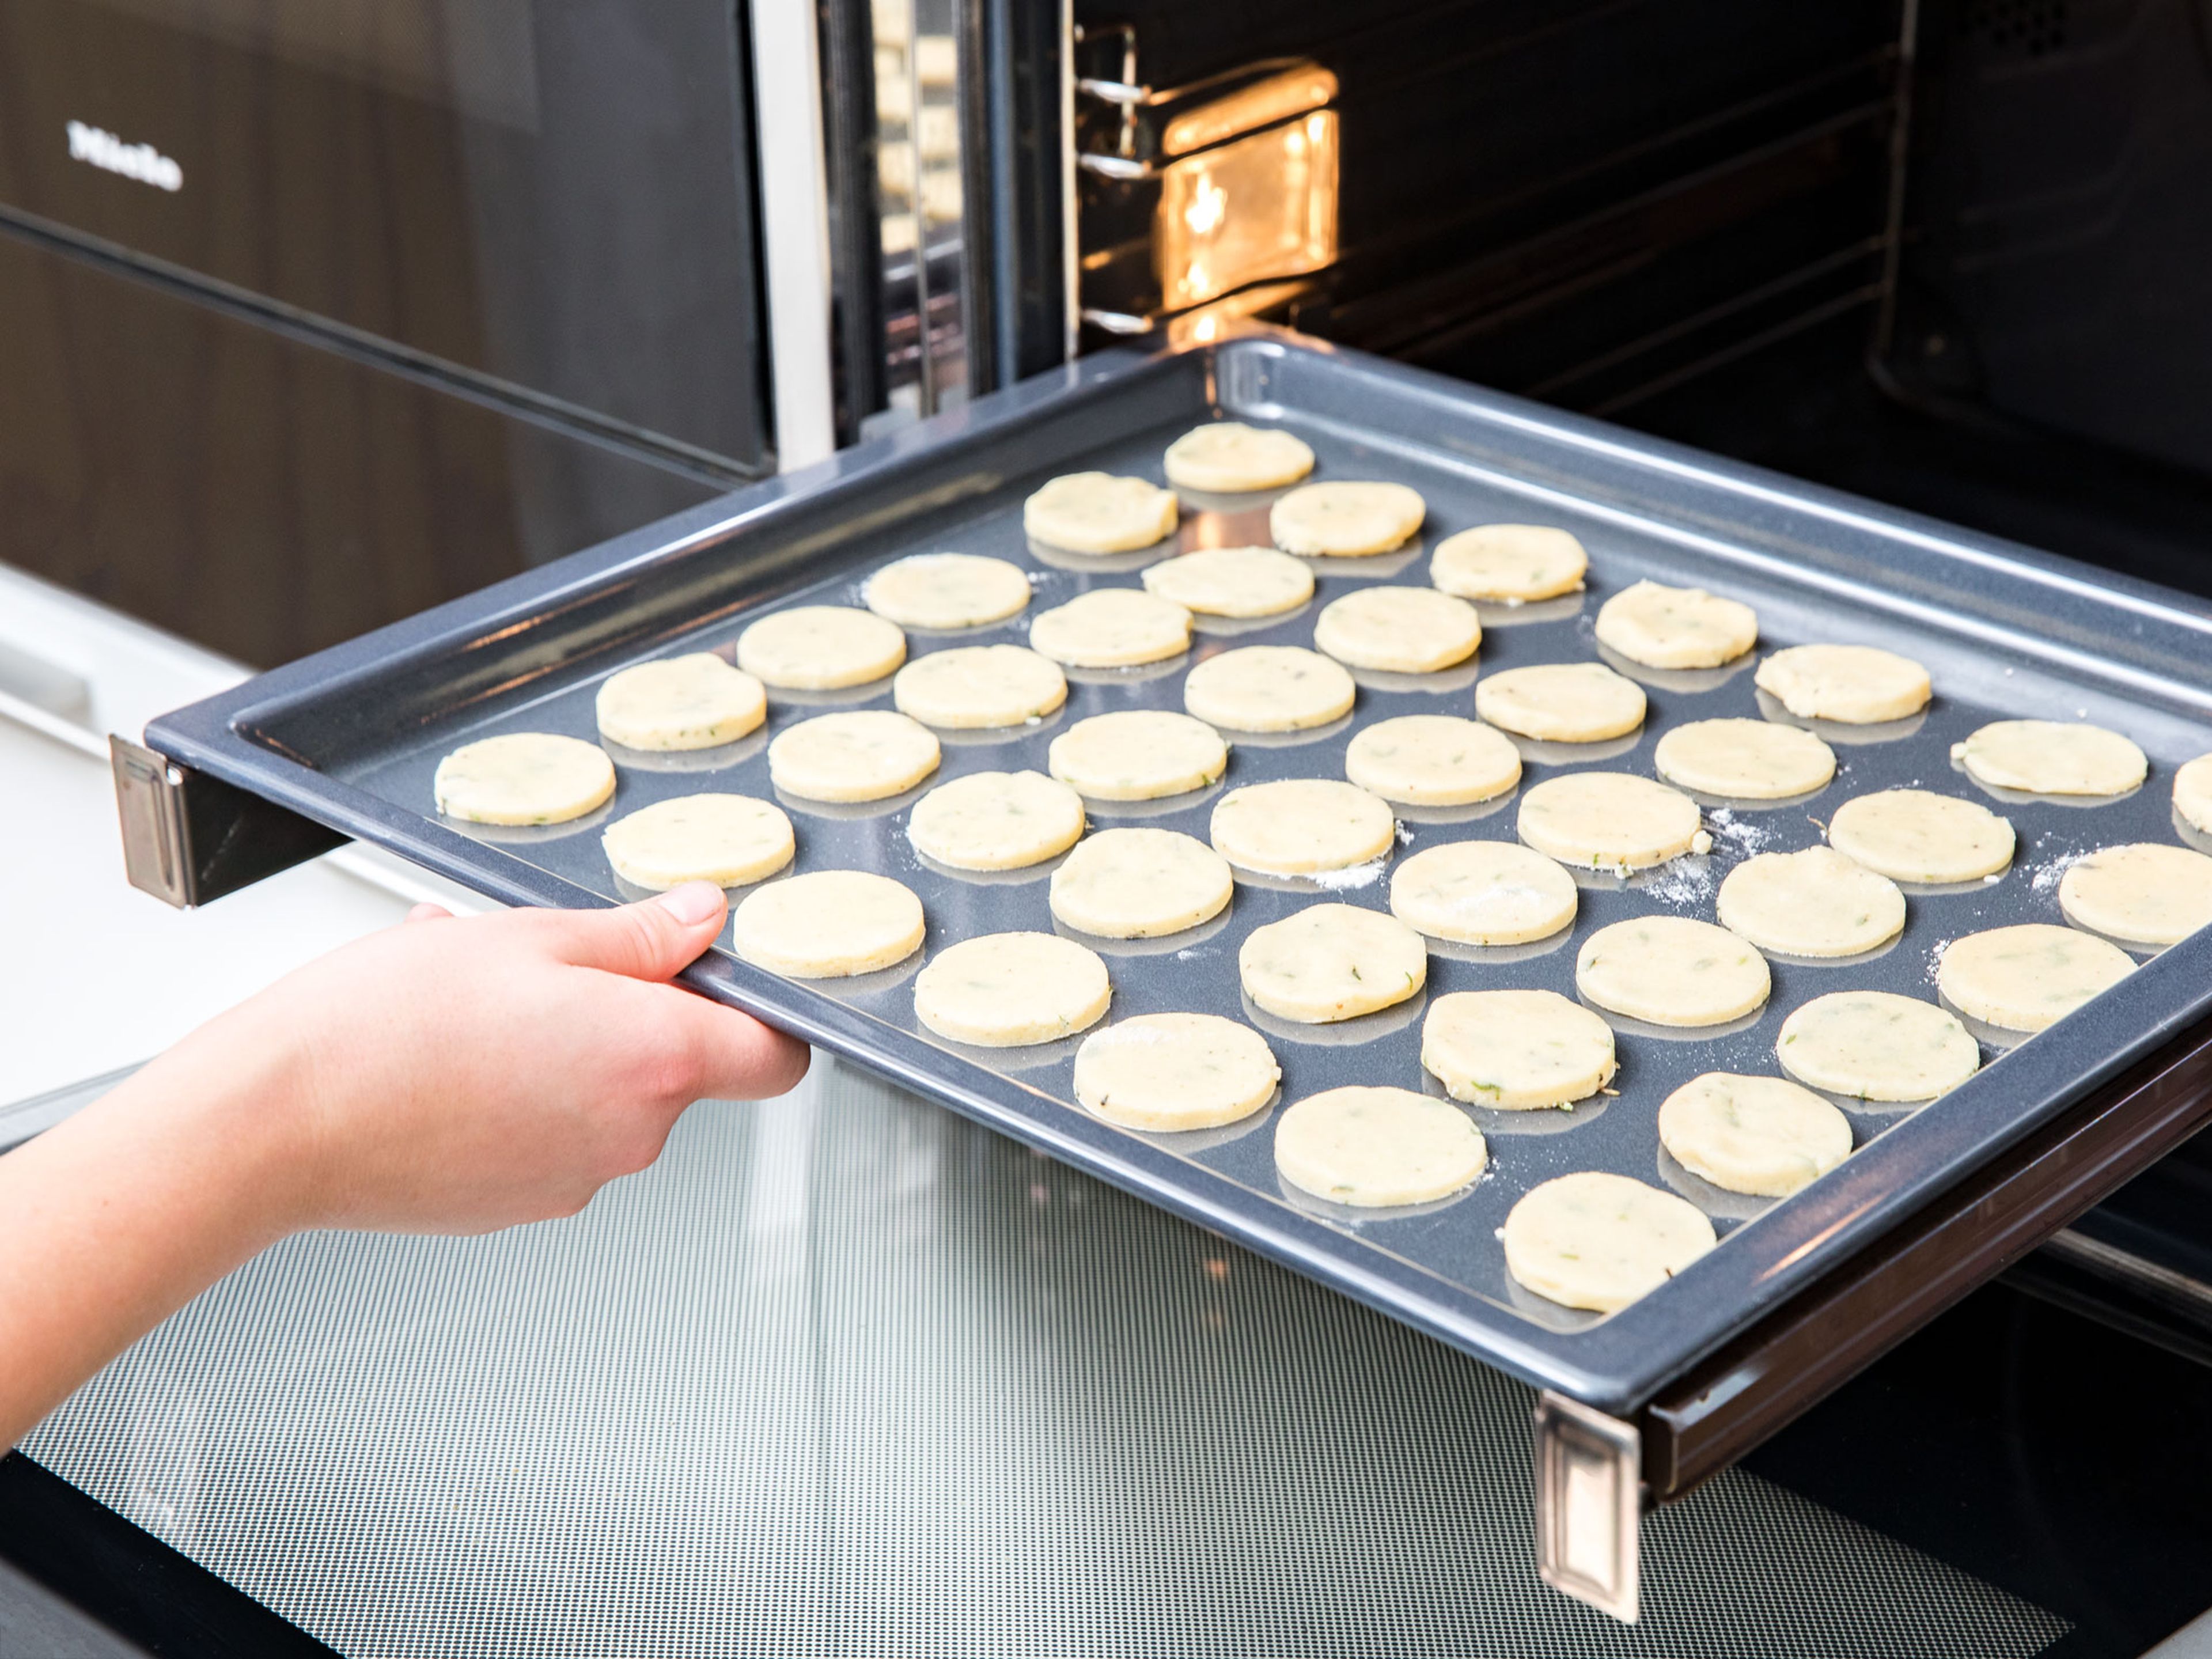 Bake at 180°C/355°F for approx. 10 min. or until the shortbread is golden brown. Serve warm or cold. Enjoy!